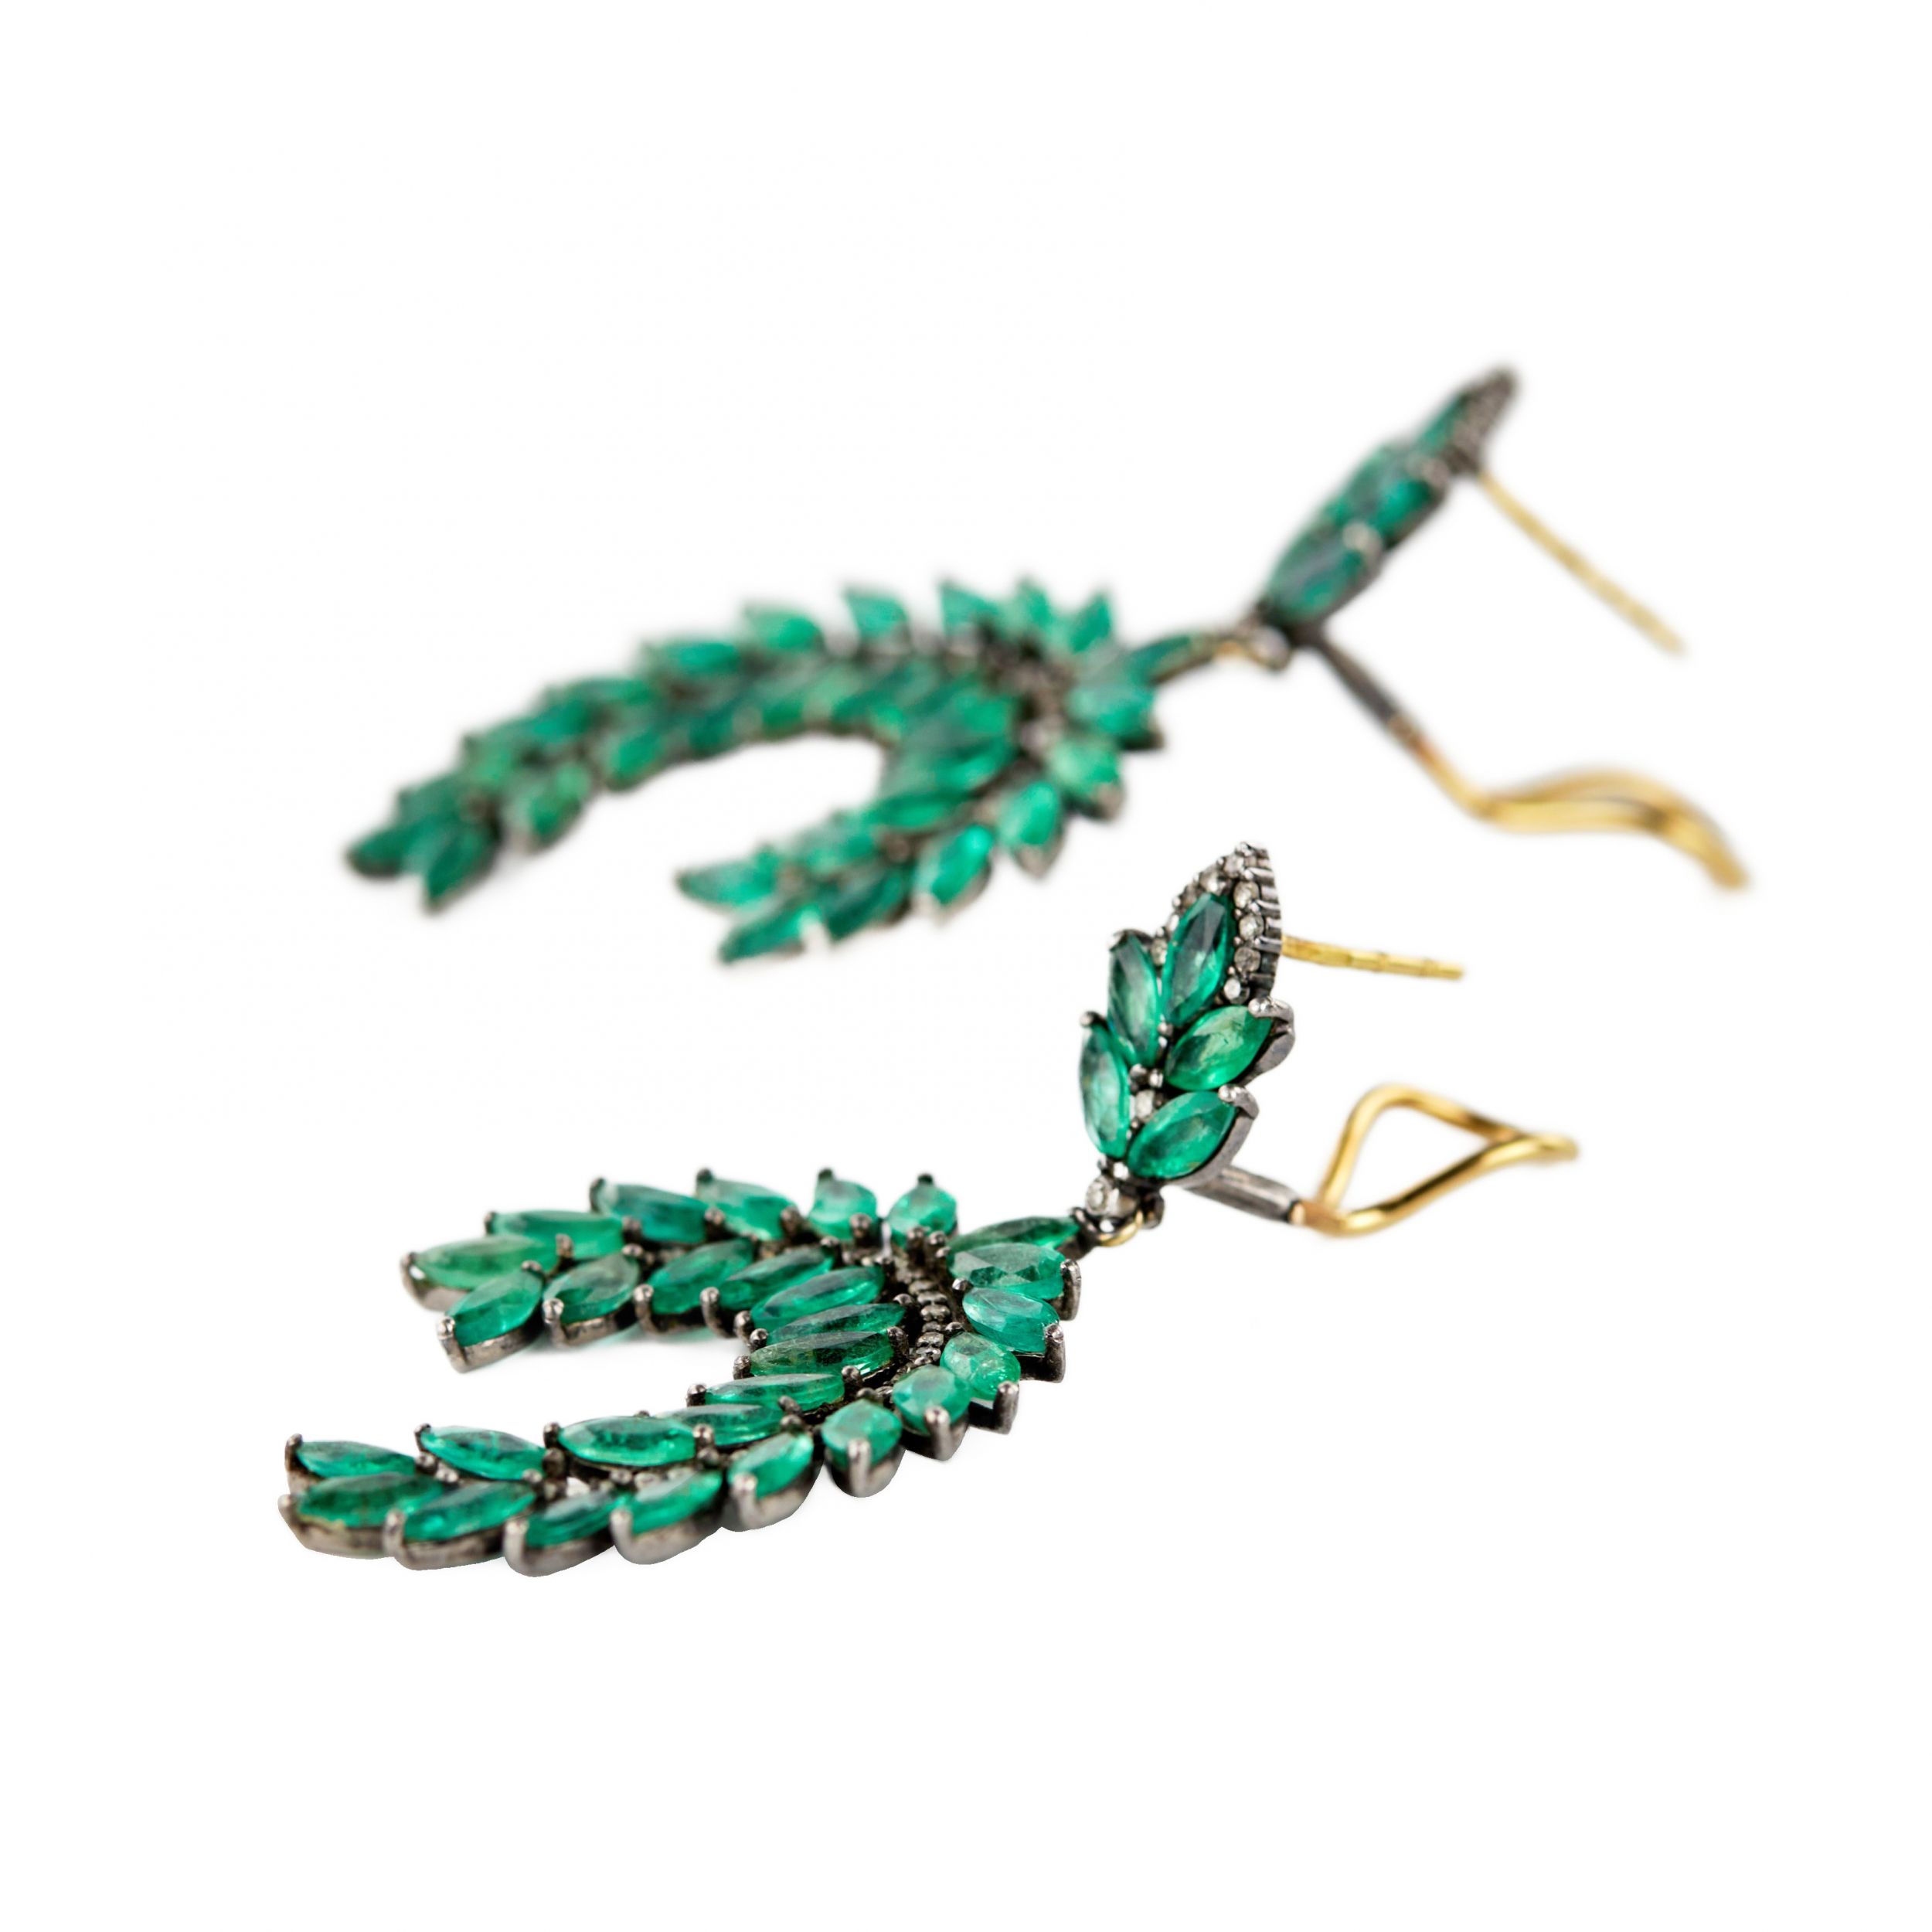 Silver earrings with emeralds and diamonds. - Image 3 of 14